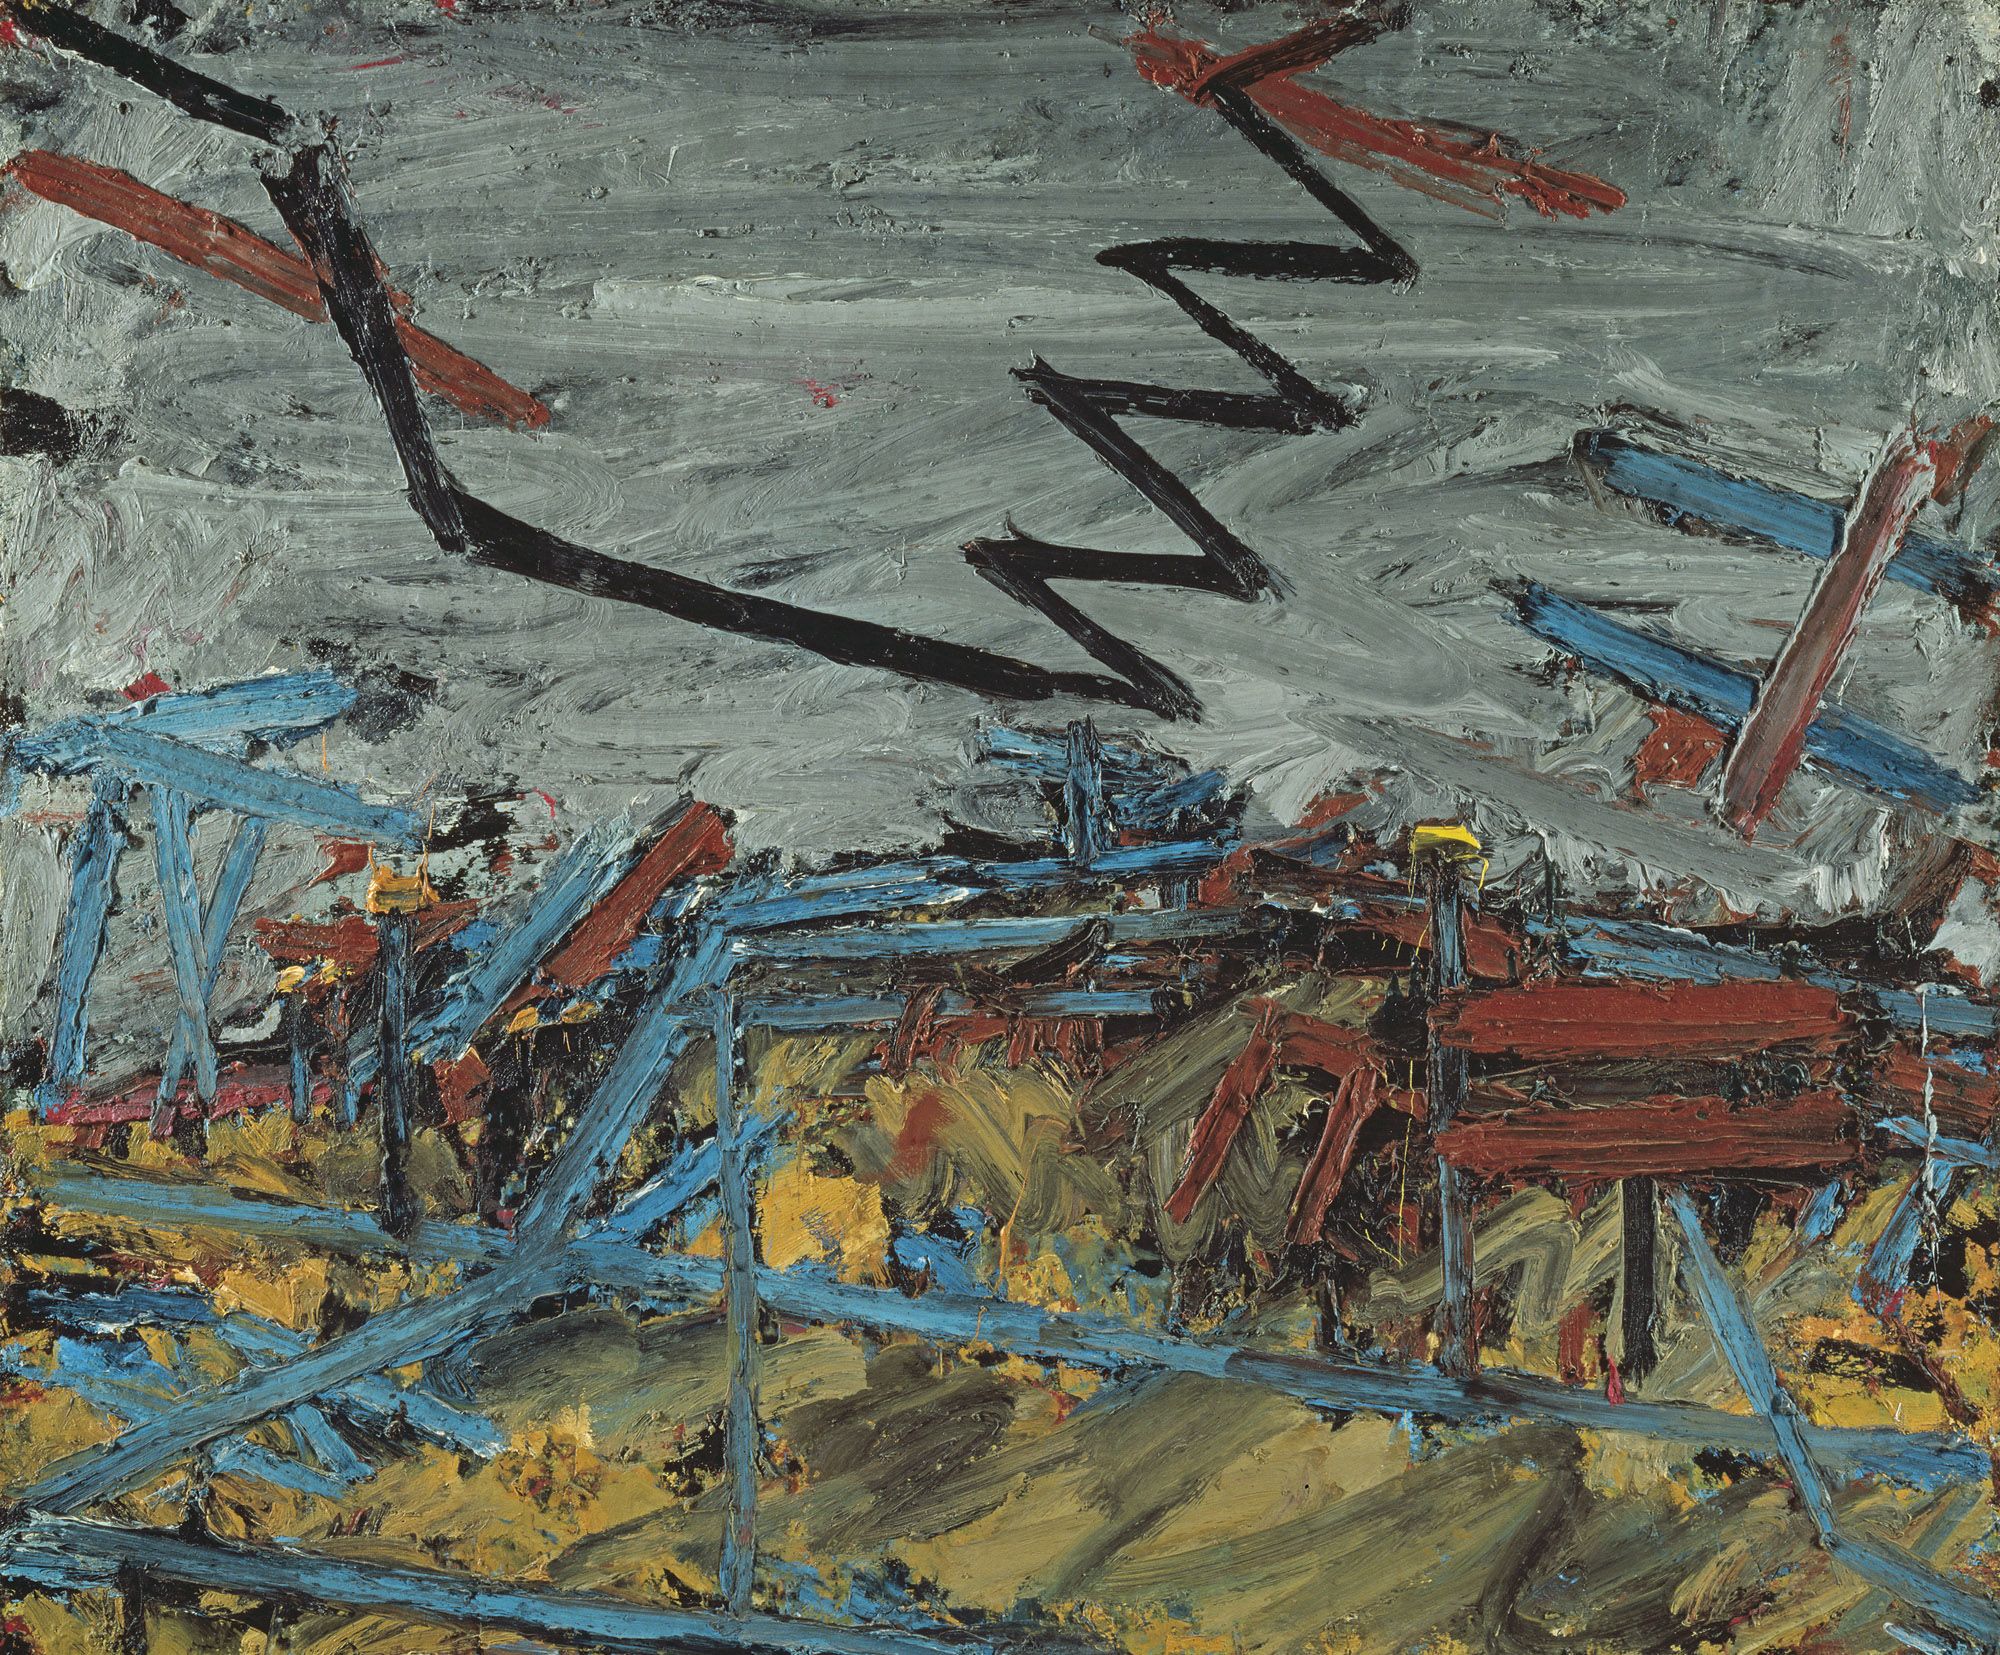 Frank Auerbach  Primrose Hill, 1967–1968 Oil paint on board 121.9 × 146.7 Tate. Purchased 1971  Credit: © Tate, London 2018